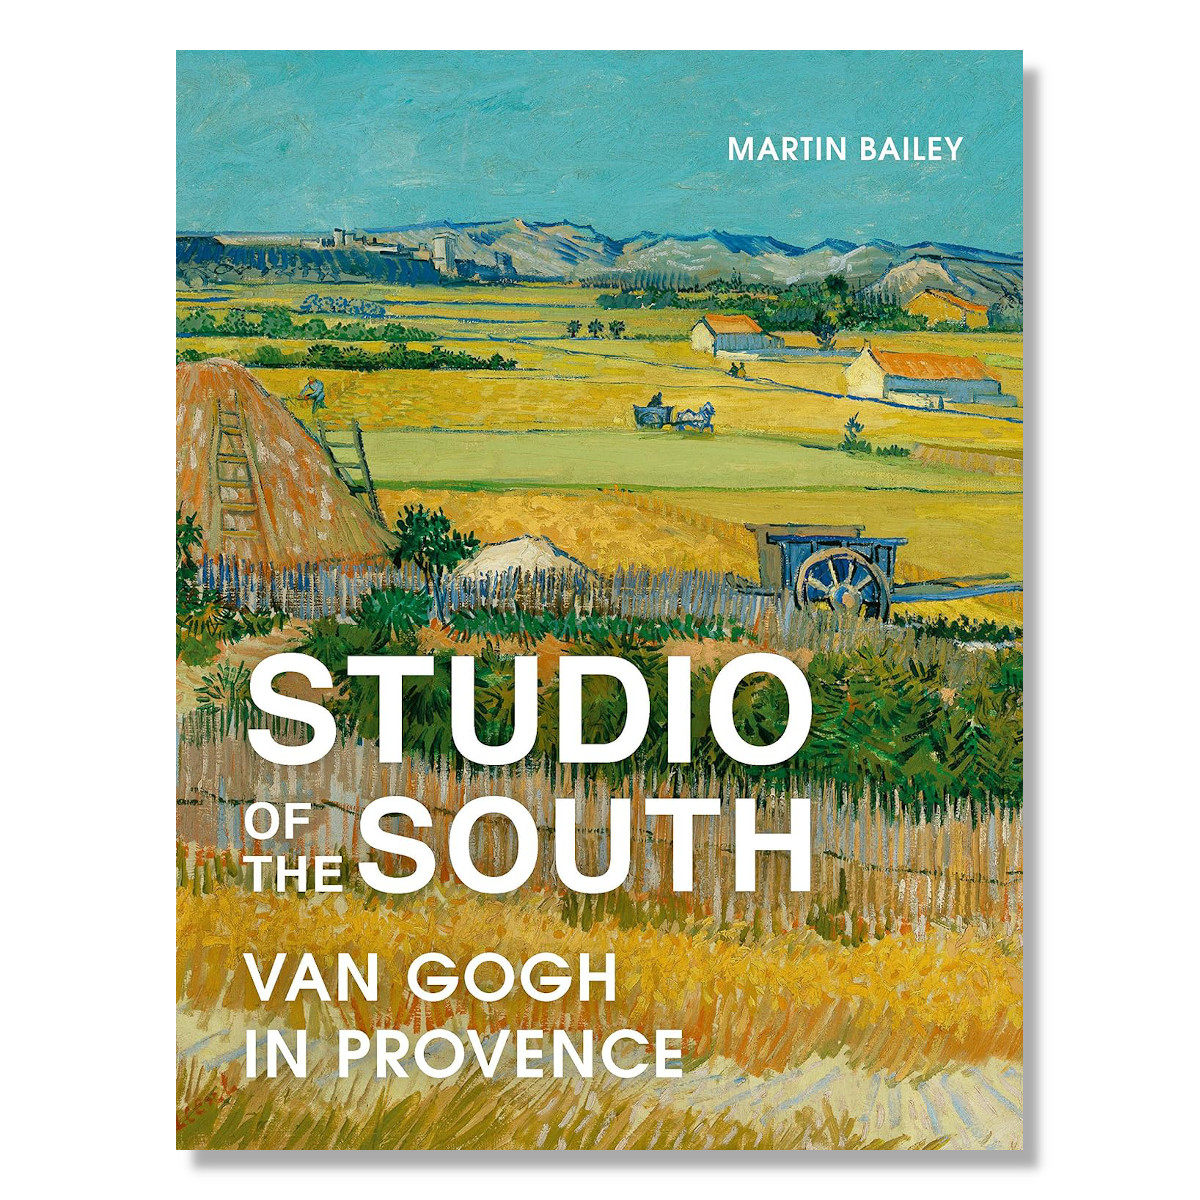 Studio of the South: Van Gogh in Provence by Martin Bailey